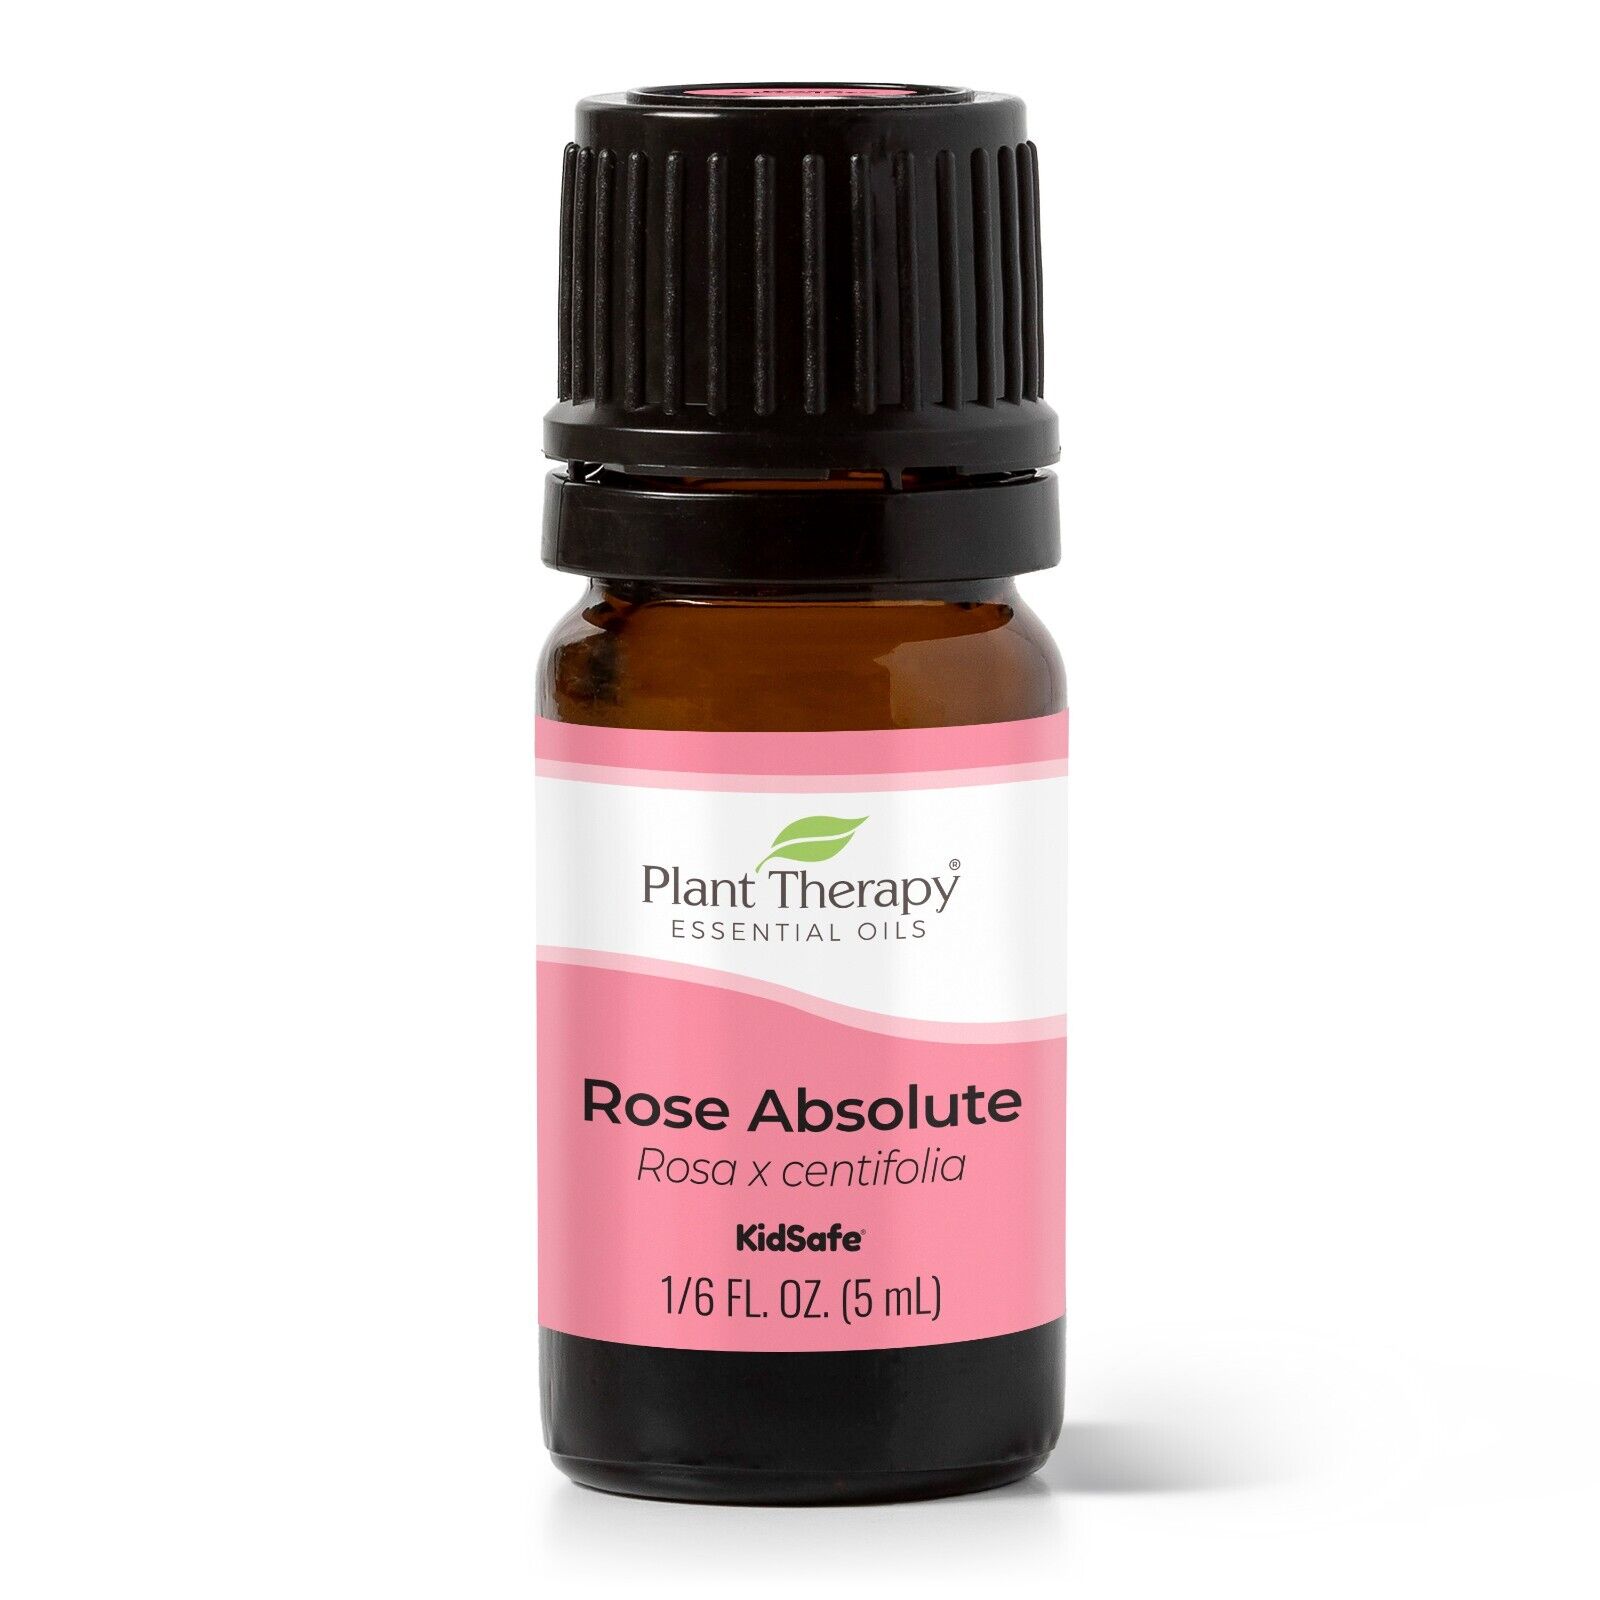 Plant Therapy Rose Absolute Essential Oil 100% Pure, Undiluted, Natural